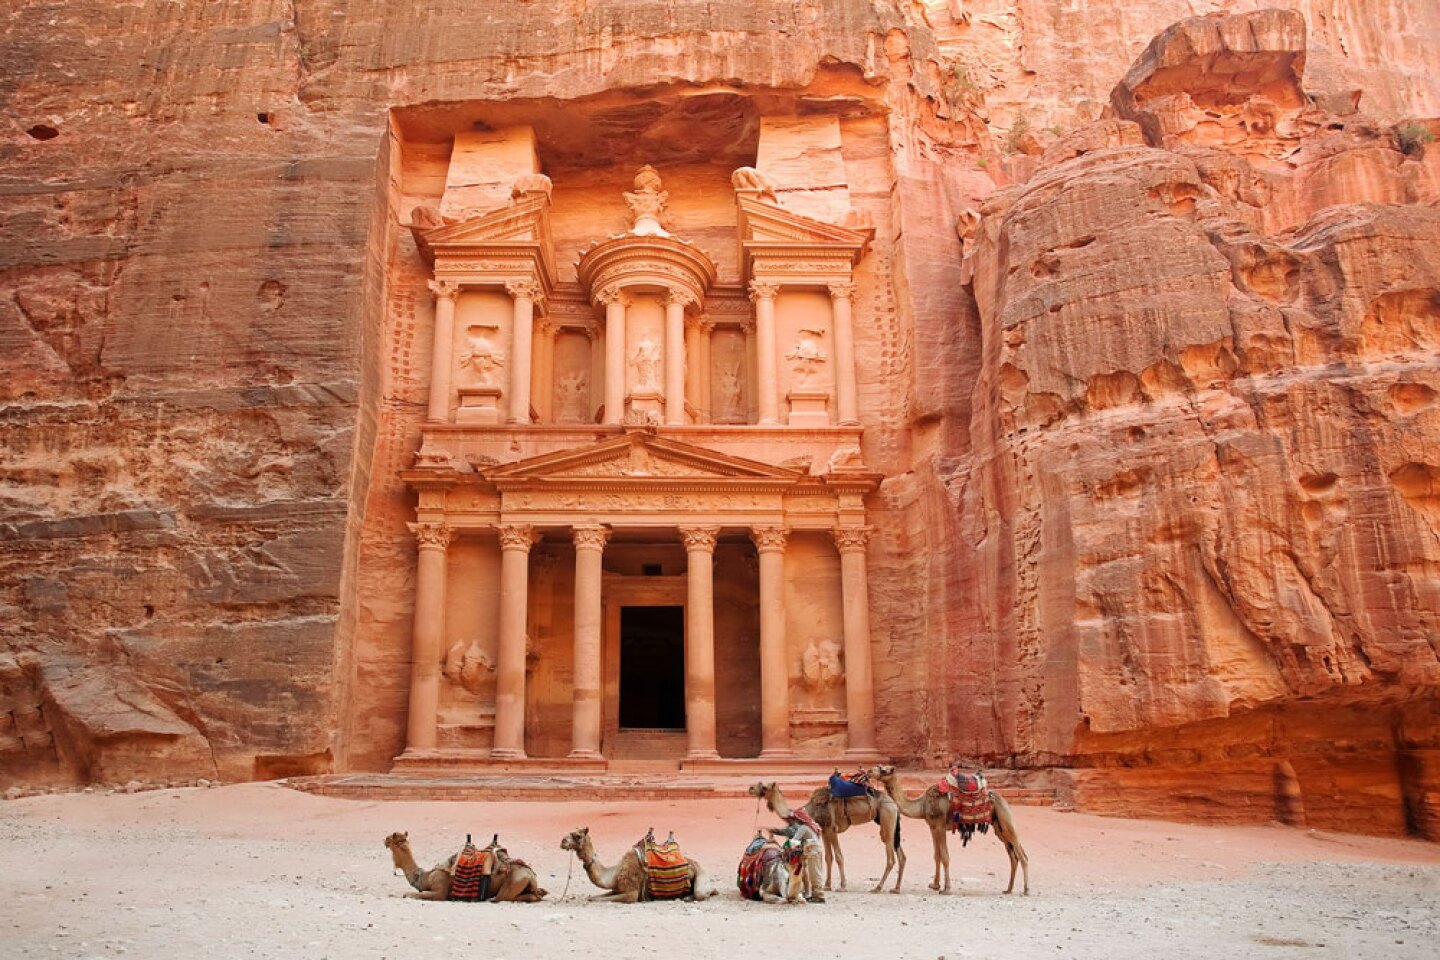 <h2>6. Petra</h2> <p><i>Wadi Musa, Jordan</i><br> During its zenith, <a class="Link" href="https://whc.unesco.org/en/list/326" rel="noopener">Petra</a>, Jordan’s most famous archaeological site, was a bustling commerce center where citizens traded Arabian incense, Chinese silks, and Indian spices. Nabateans built the ancient city in the country’s southwestern desert in 400 B.C.E., but it was unknown to the Western world until the 1800s. Accessed via a narrow canyon and with towering temples and tombs carved into pink sandstone cliffs (earning it the name “The Red Rose City”), it feels otherworldly. Perhaps that’s why Petra’s treasury stood in for the temple housing the Holy Grail in <i>Indiana Jones and the Last Crusade</i>.</p> <p> <b>How to visit</b><br>This UNESCO World Heritage site is about 150 miles south of Jordan’s capital, Amman. Most visitors access Petra Archaeological Park through Wadi Musa, a nearby town with a handful of luxurious hotel offerings for travelers who make the trip to the rock-wall crypts. One-day tickets for visitors who spend at least a night in Jordan cost approximately $70 for adults; entry for children 12 and under is free.</p>